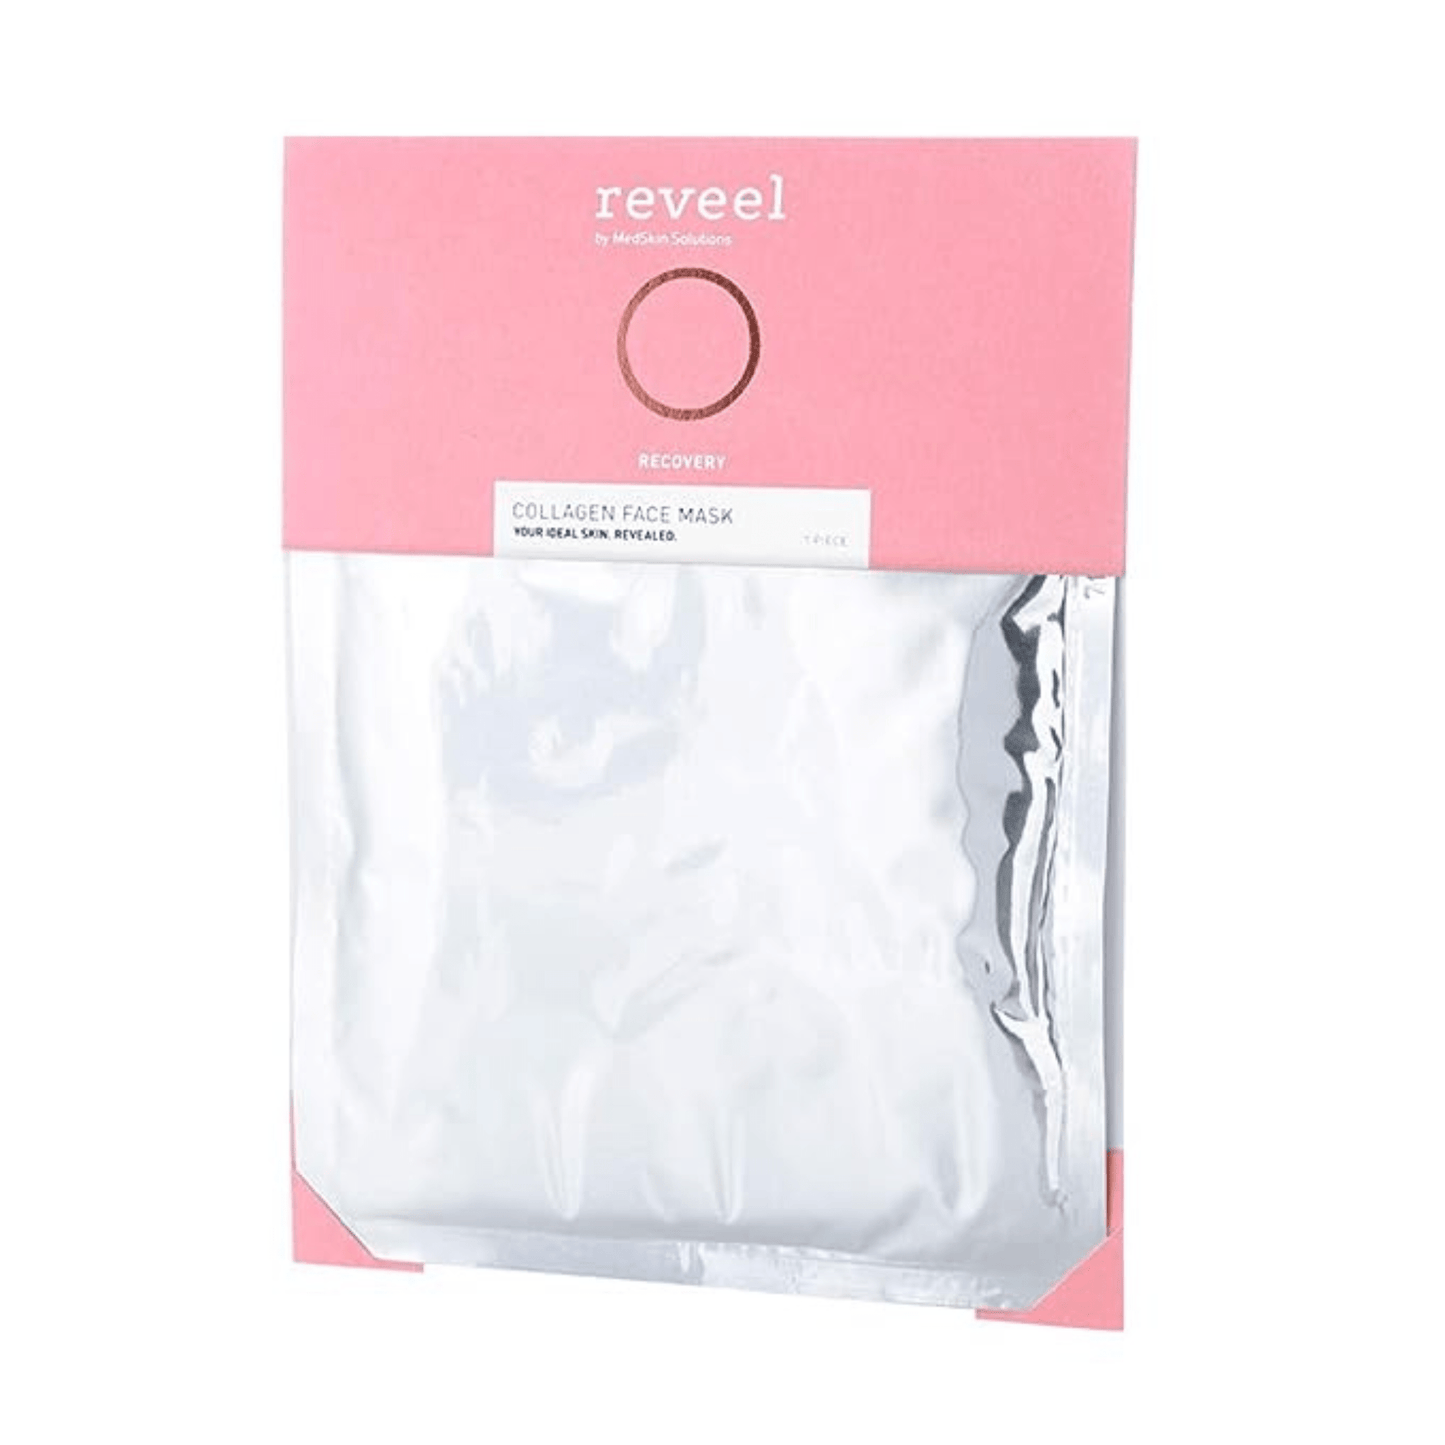 Primary Image of Collagen Face Mask